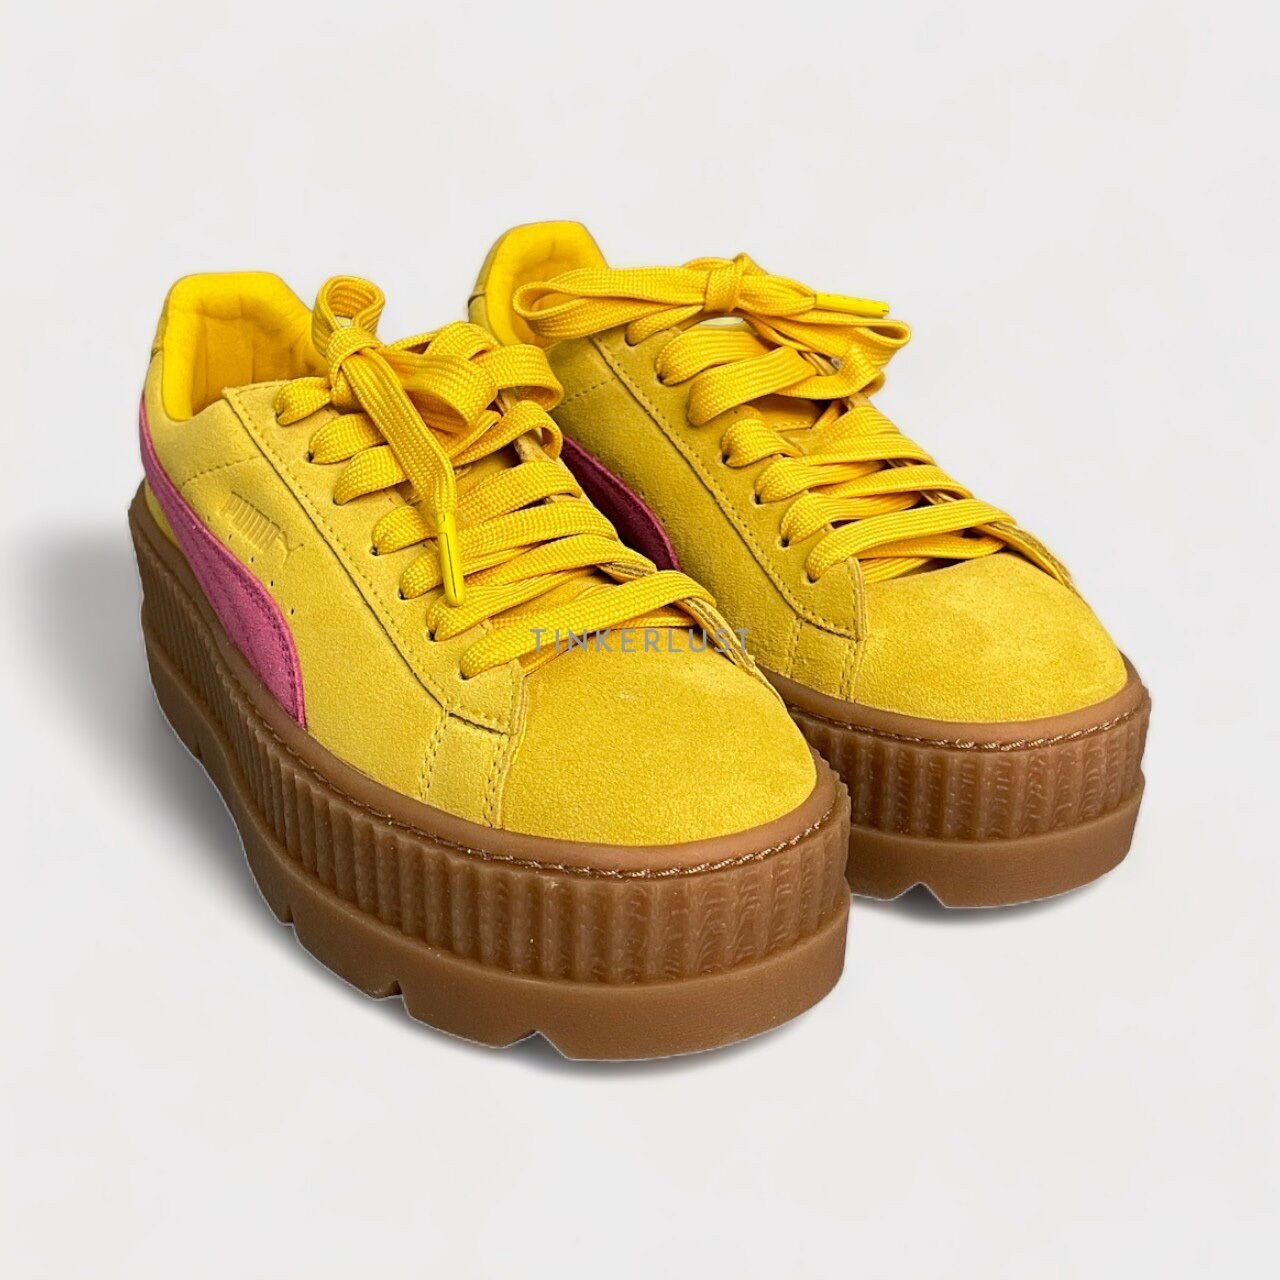 Puma Fenty by Rihanna Cleated Creeper Suede Yellow Sneakers